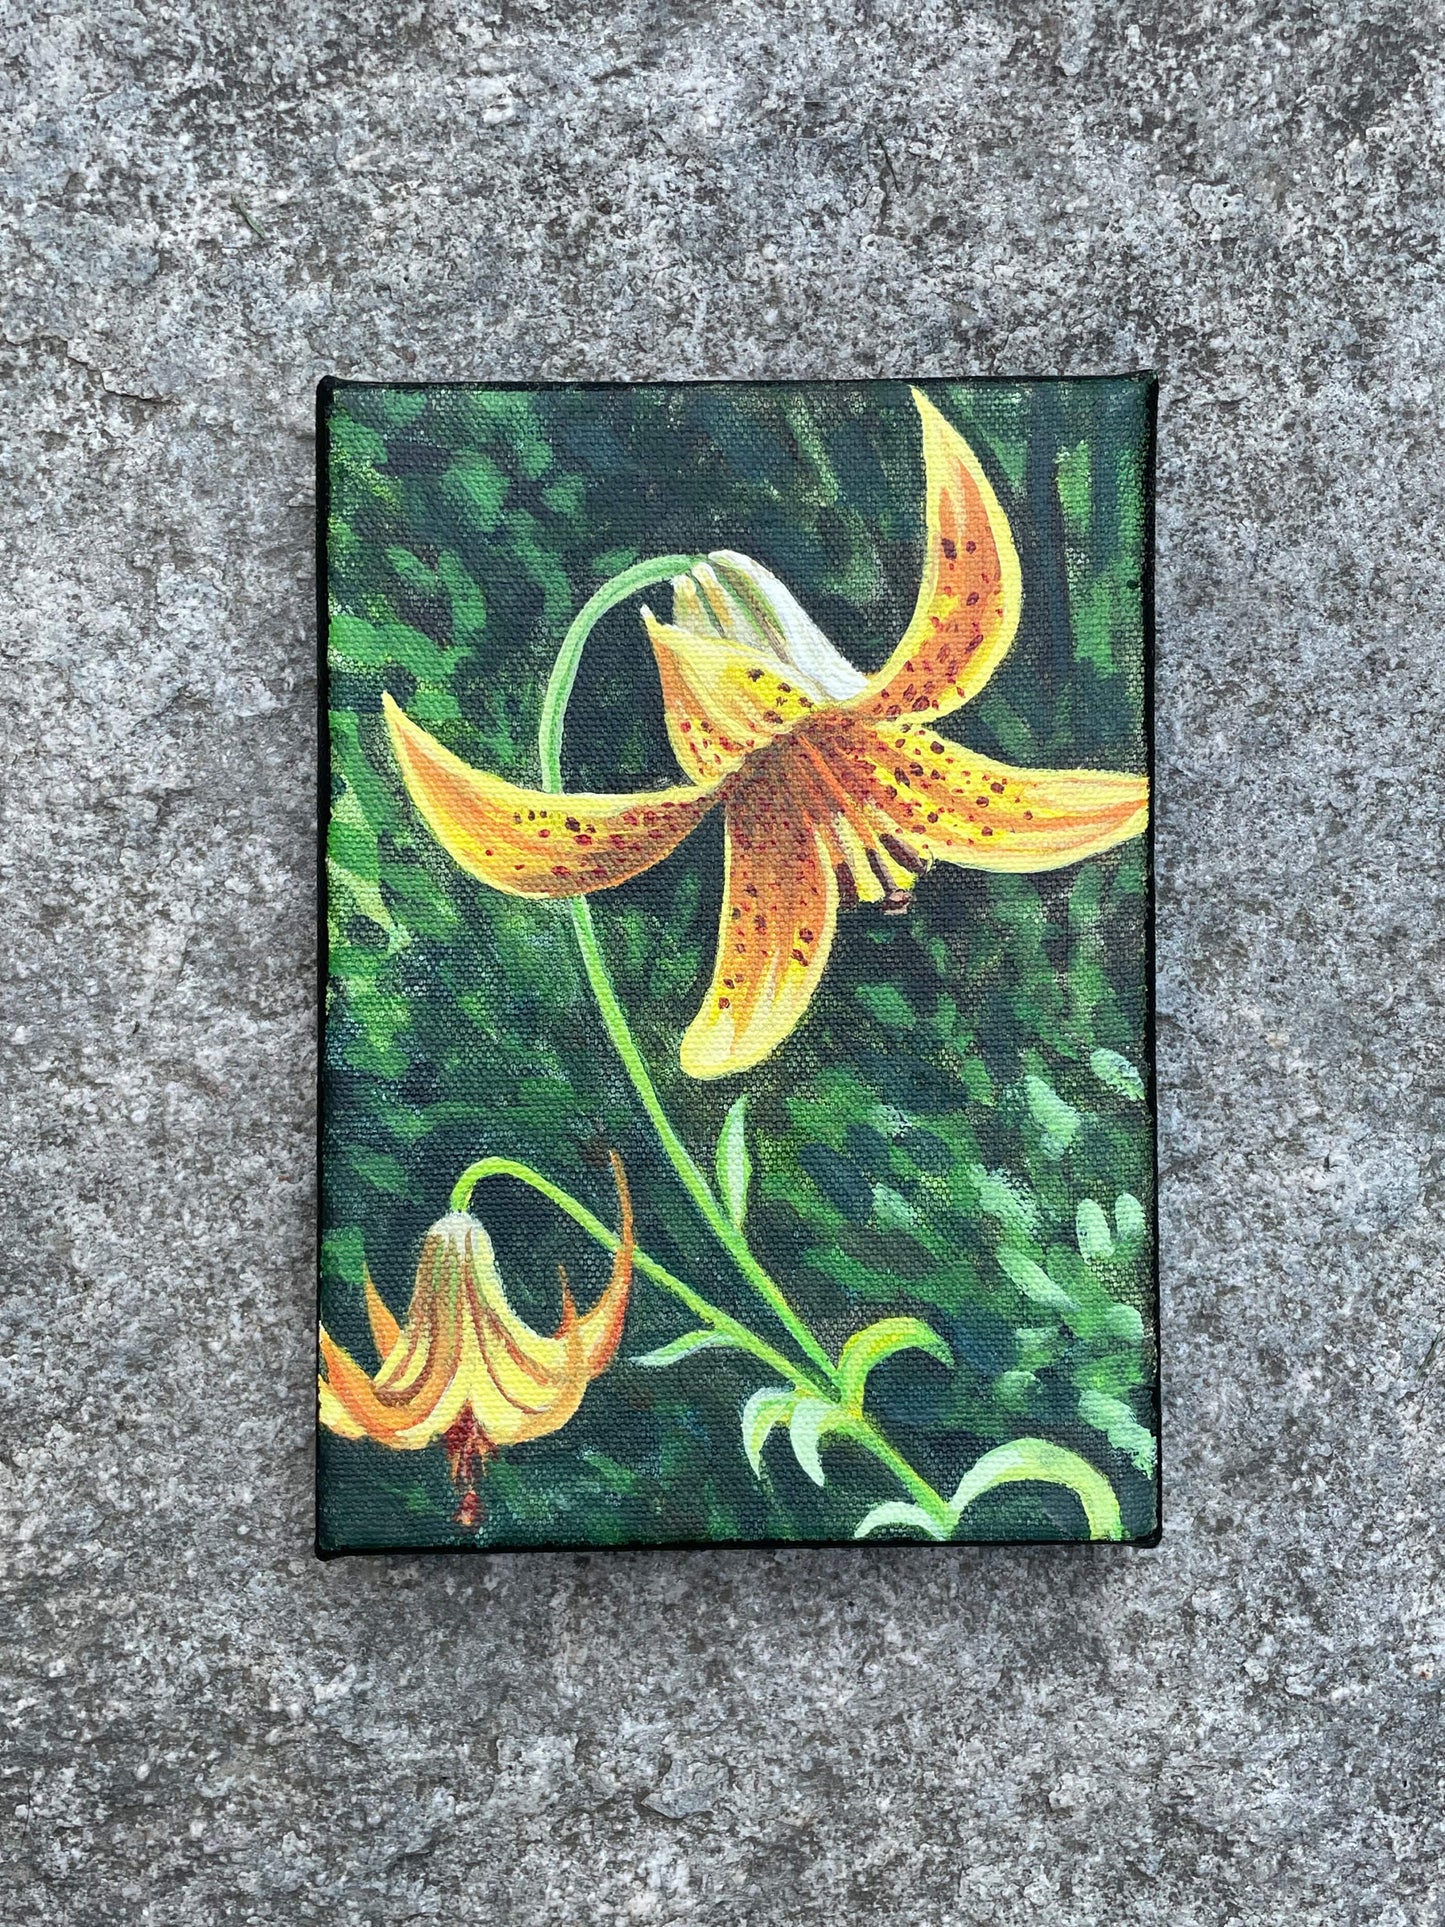 Canada Lily Painting - 5x7